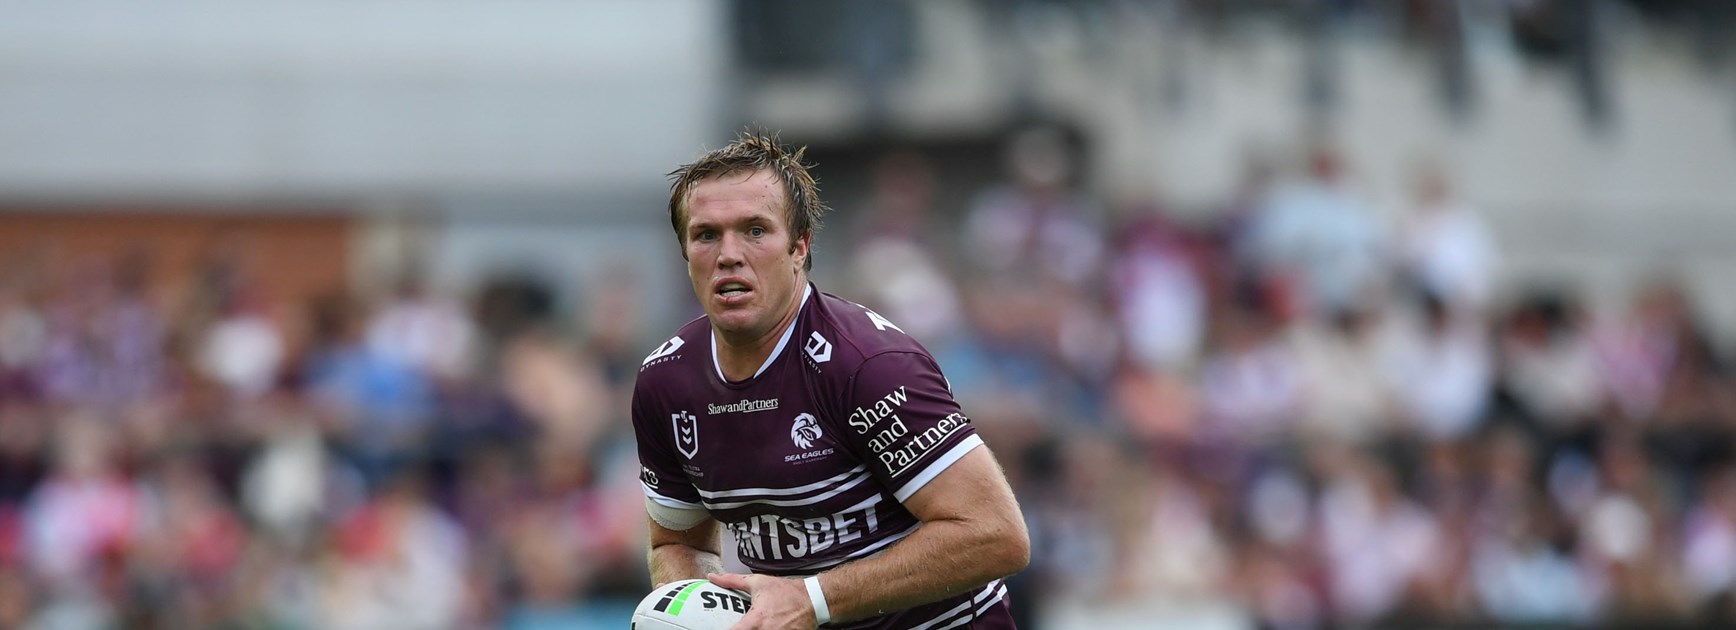 Five Manly juniors captain NSW in club's history